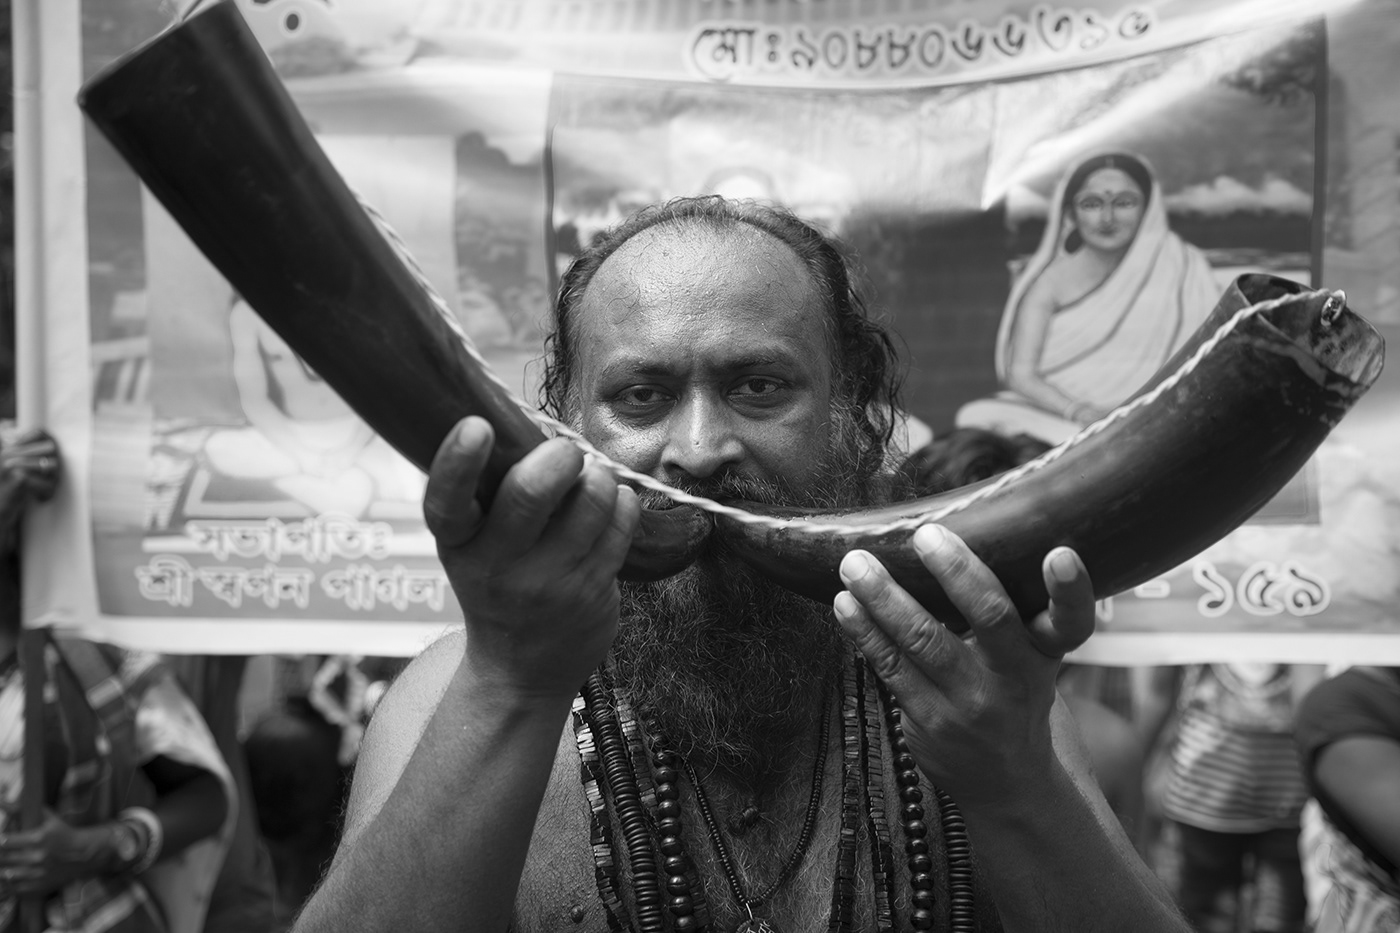 person human face portrait storytelling photography streetphotography blackandwhite travelphotography India kolkata photographer street photography